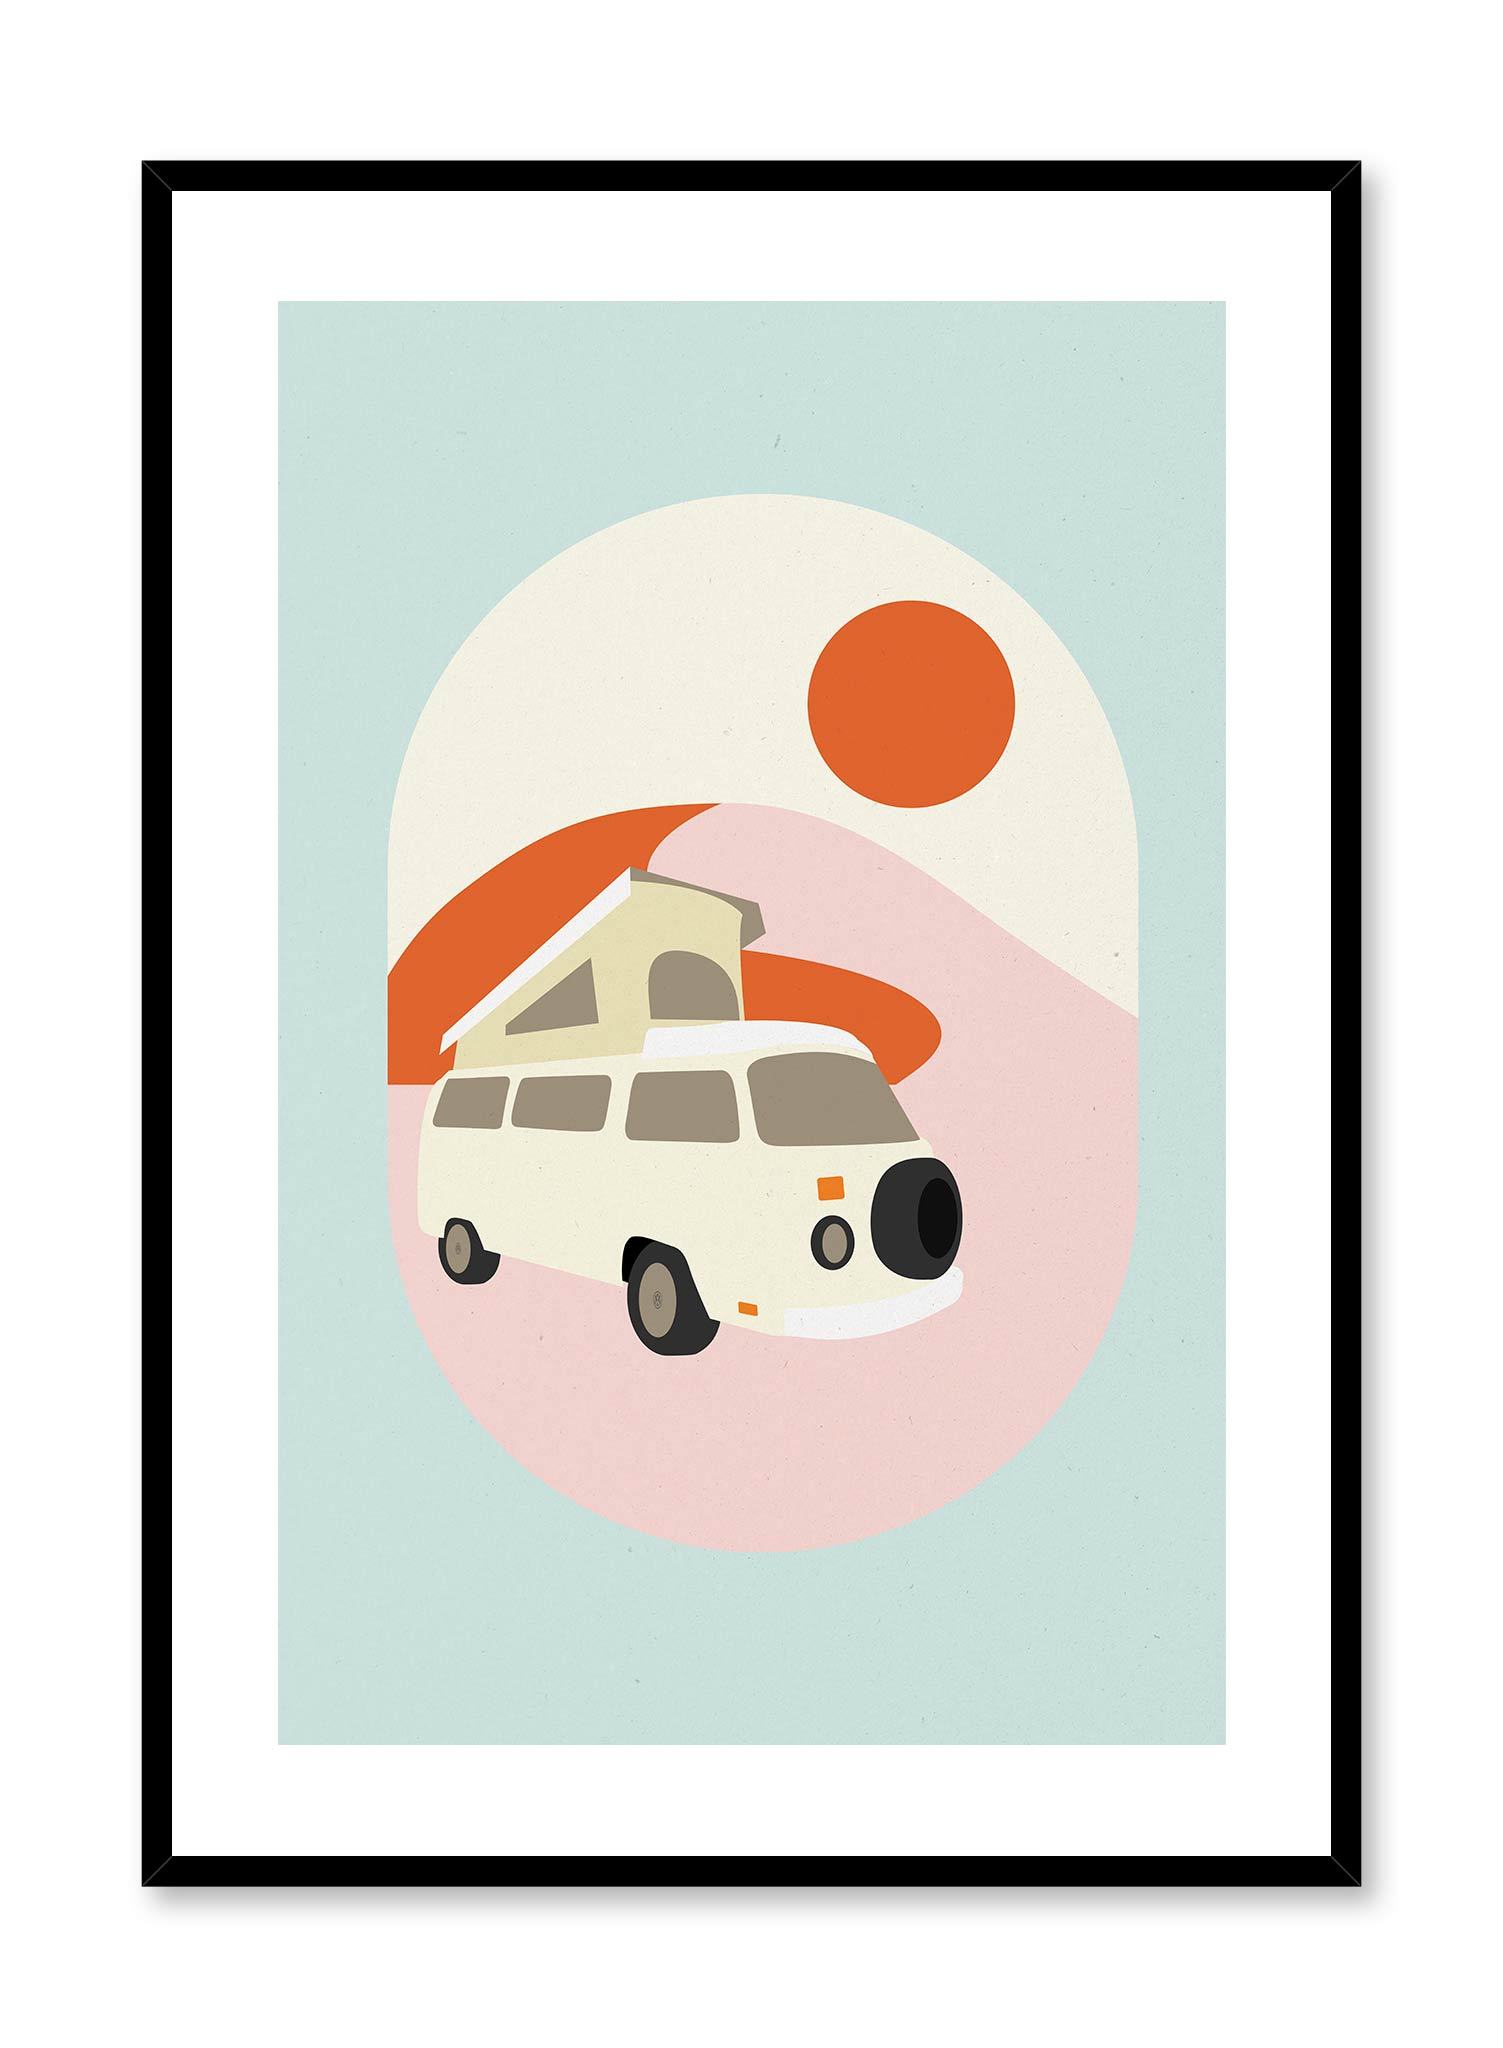 Life on the Road is a minimalist illustration poster of a colourful RV by Opposite Wall.